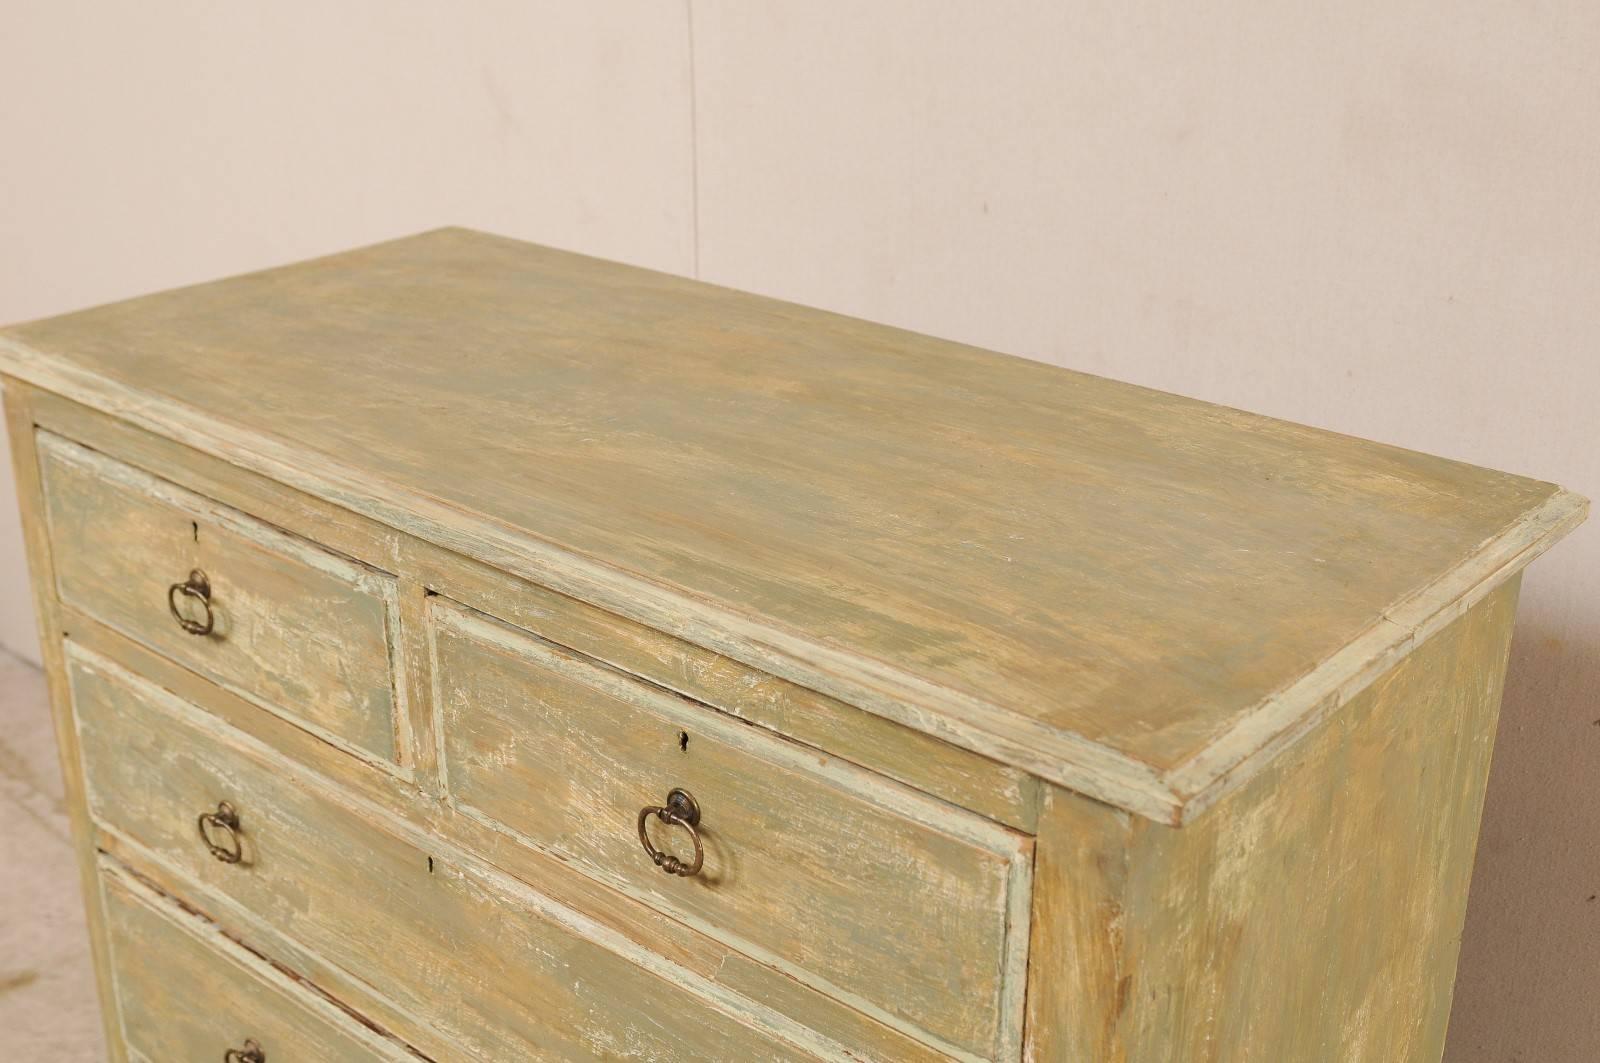 Swedish Painted Wood Five-Drawer Antique Chest in Green-Grey and Beige Tones 1